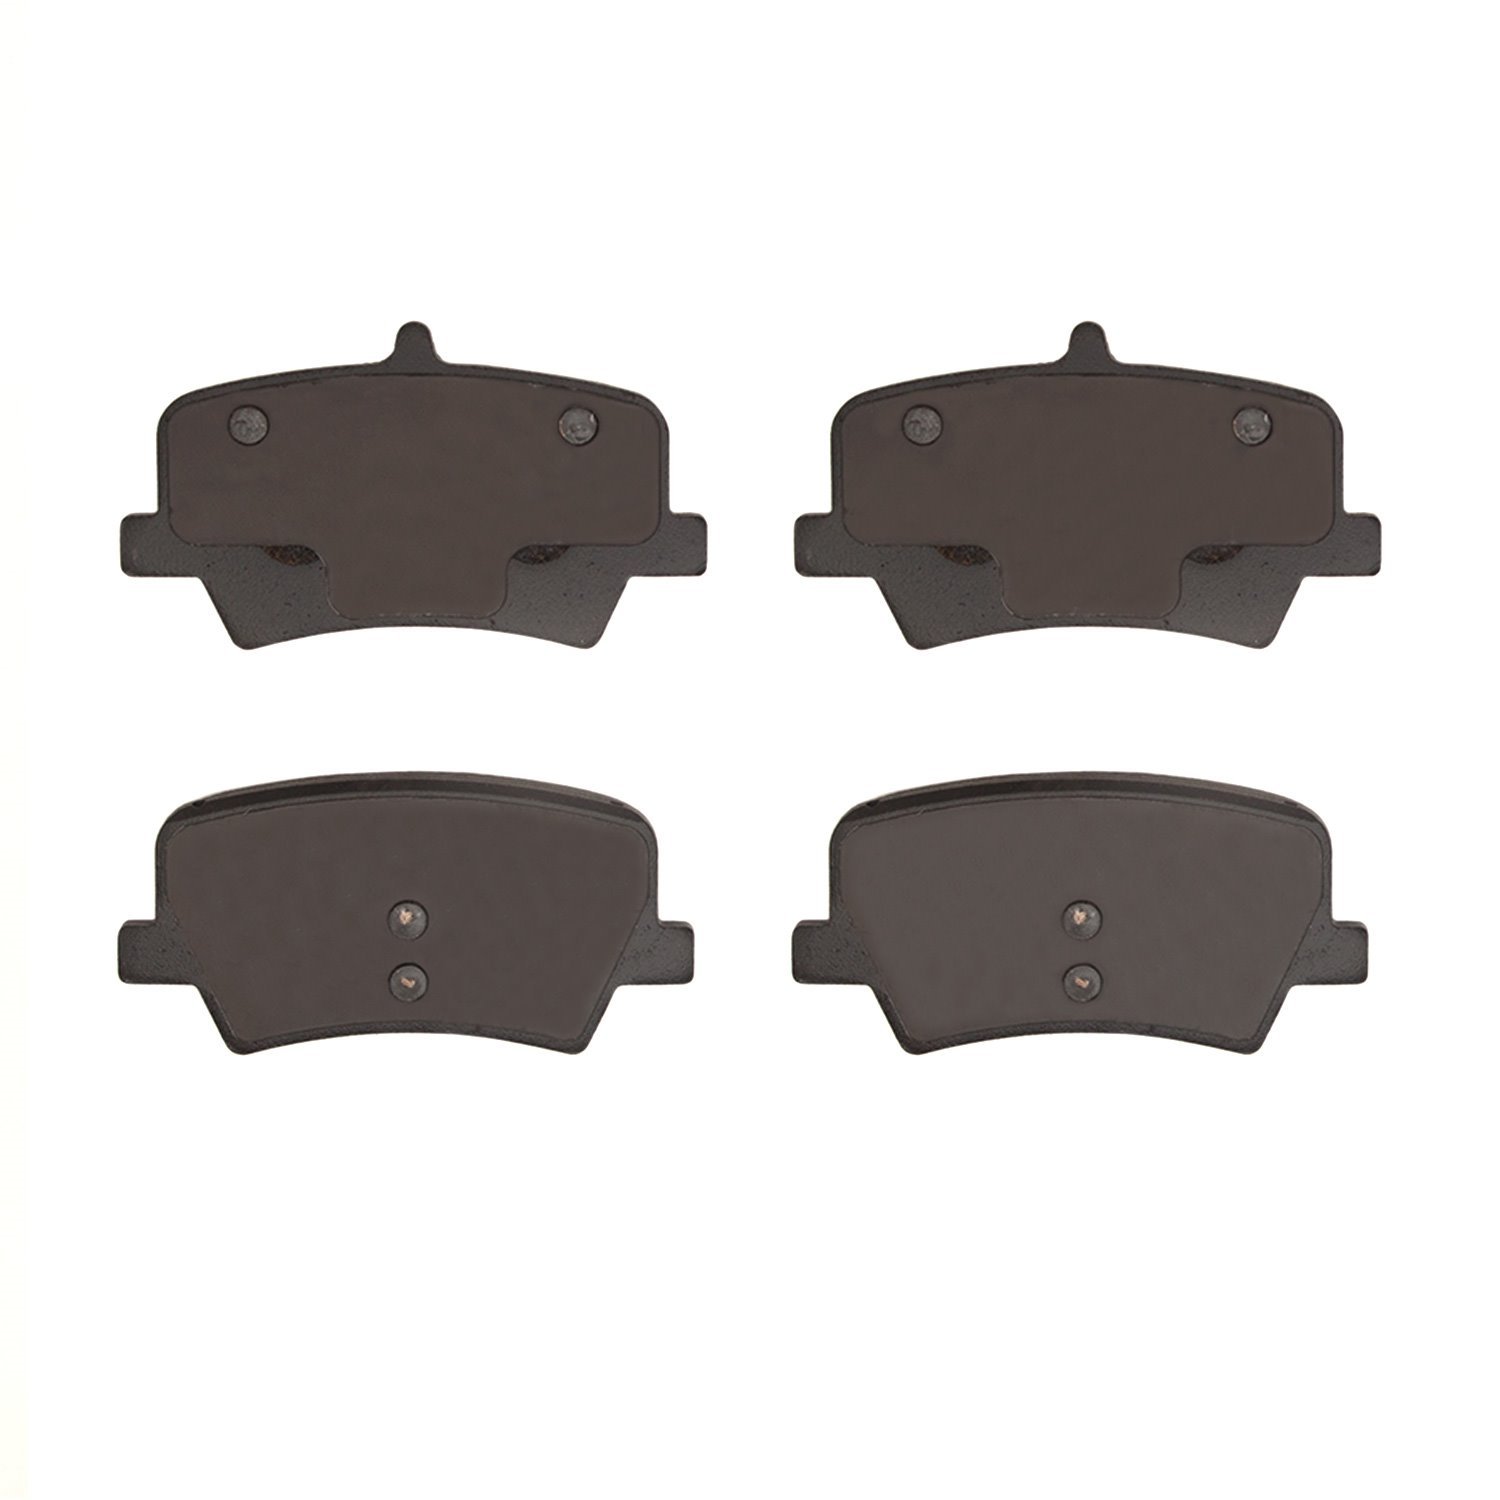 1310-2136-00 3000-Series Ceramic Brake Pads, Fits Select Volvo, Position: Rear